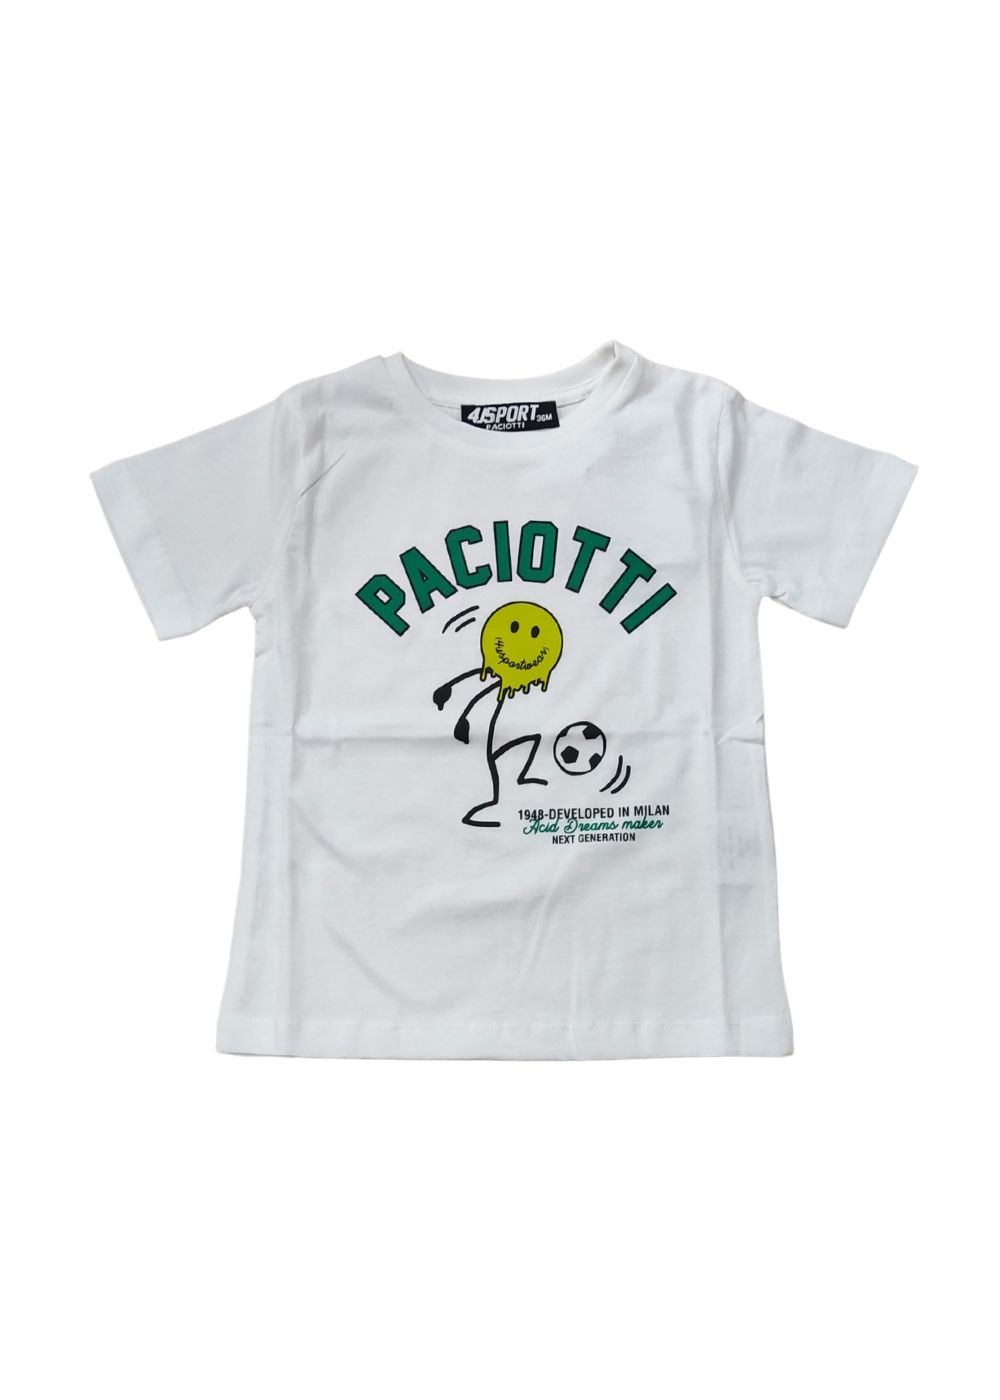 Featured image for “Paciotti 4us T-shirt in cotone”